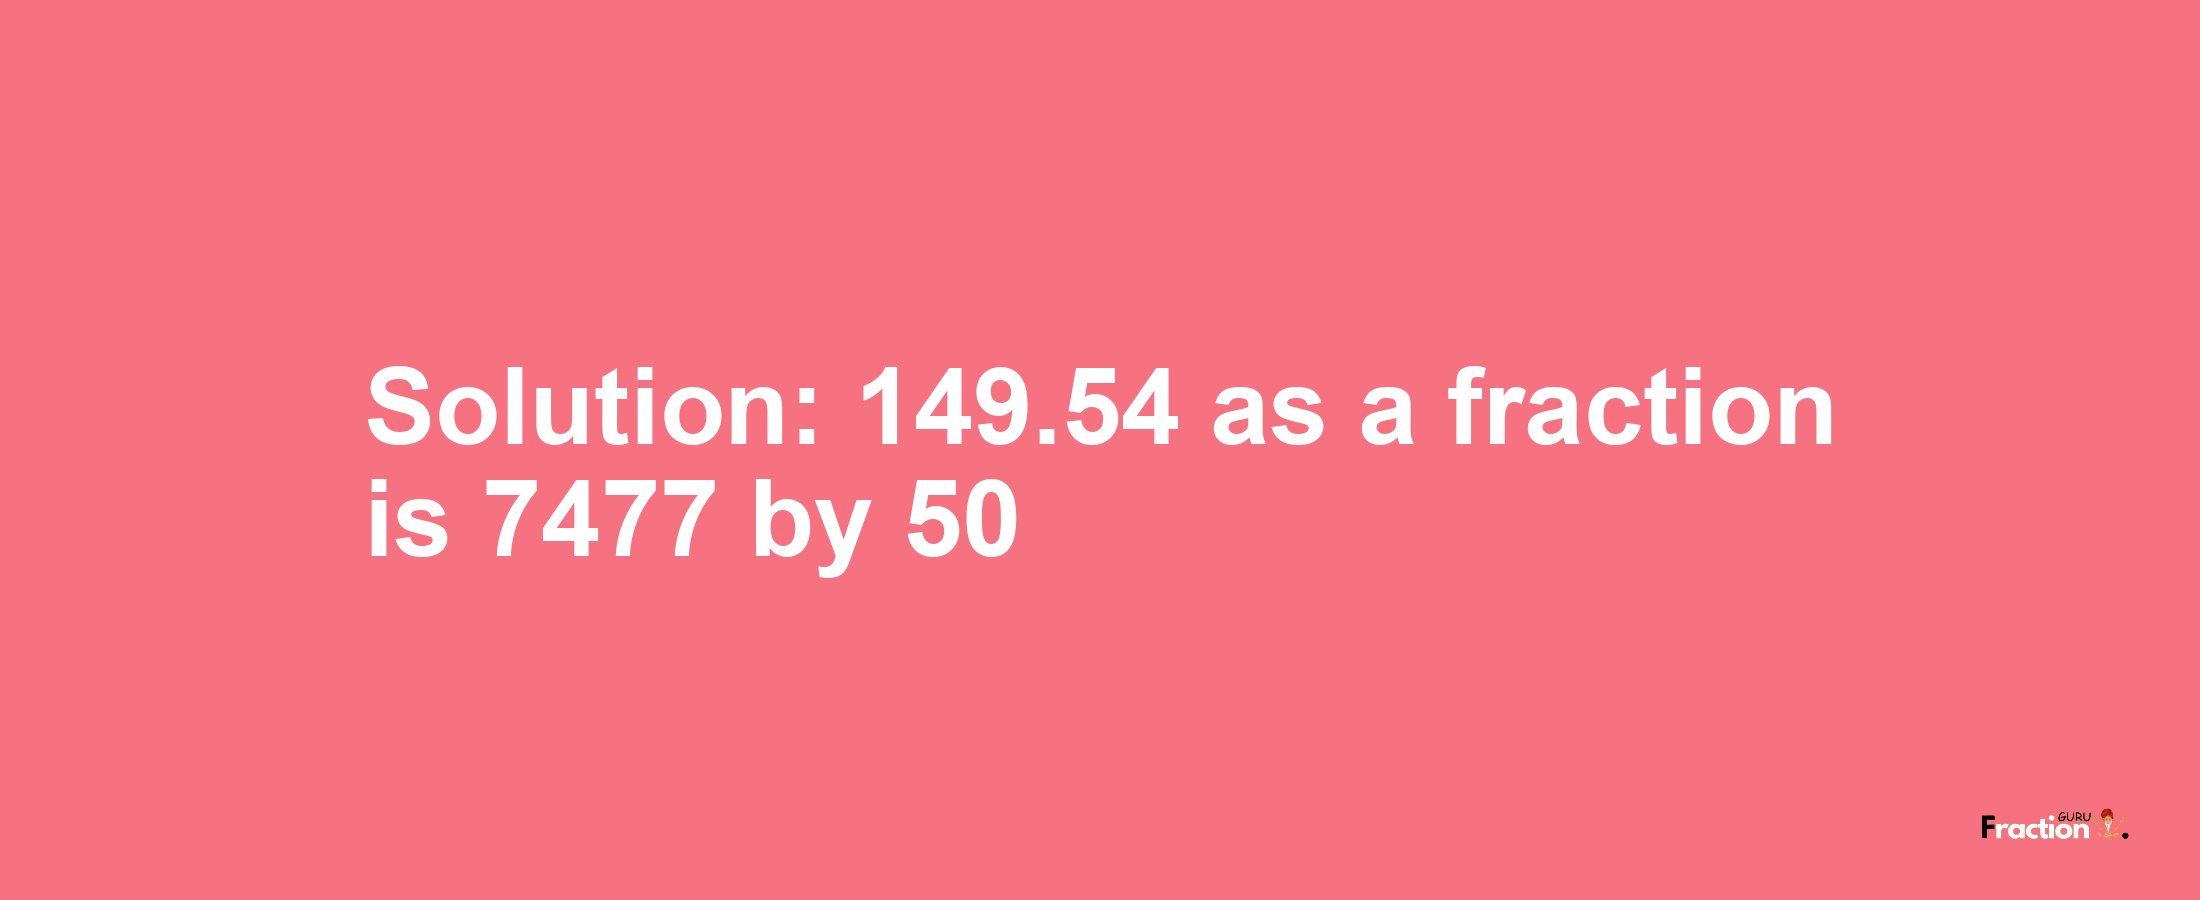 Solution:149.54 as a fraction is 7477/50